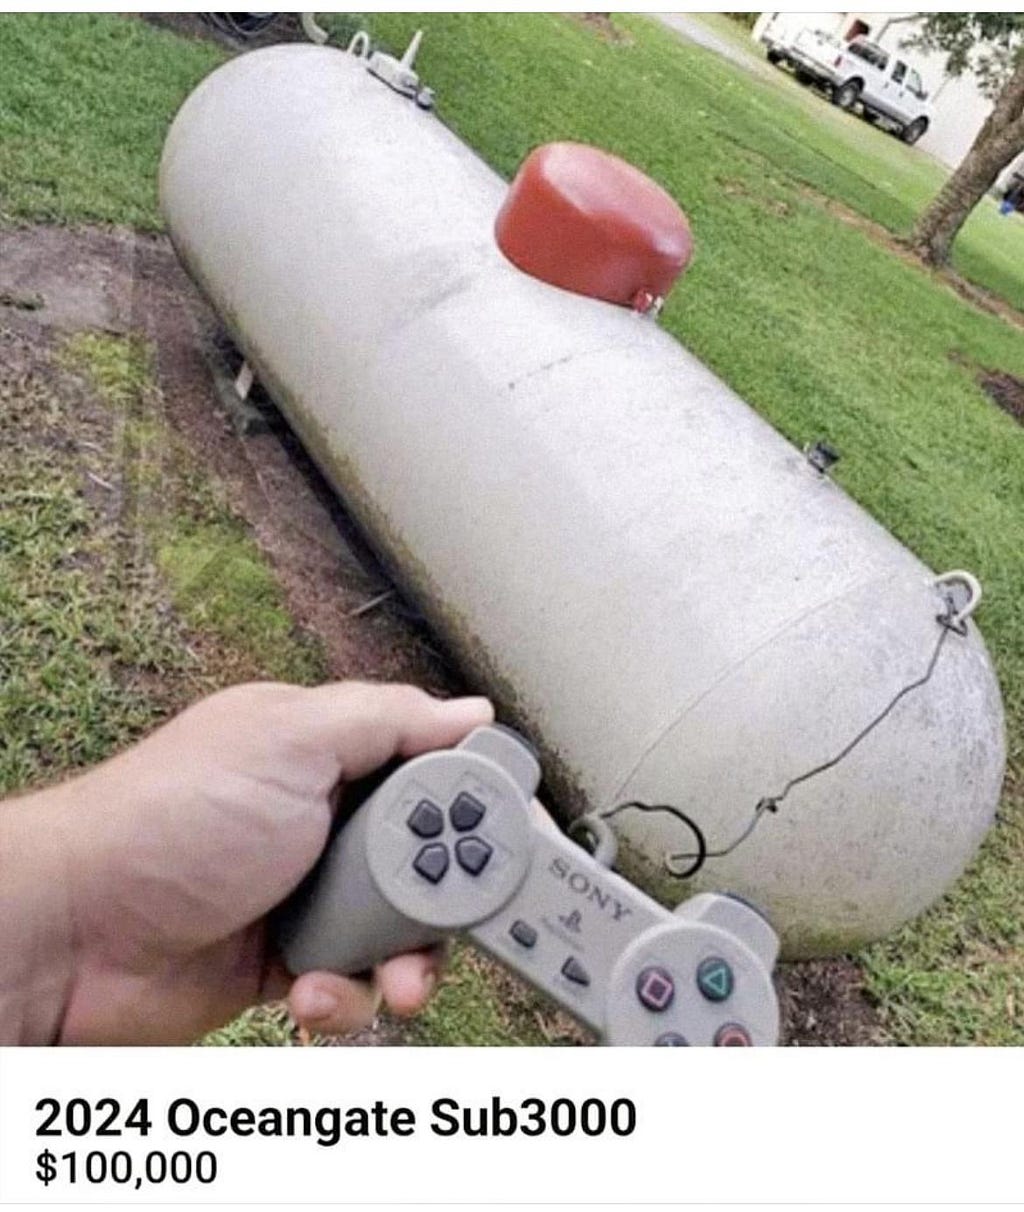 A steel container for home heating gas with a playstation 1 controller attached. Caption reads “2024 Oceangate Sub3000, $100,000”